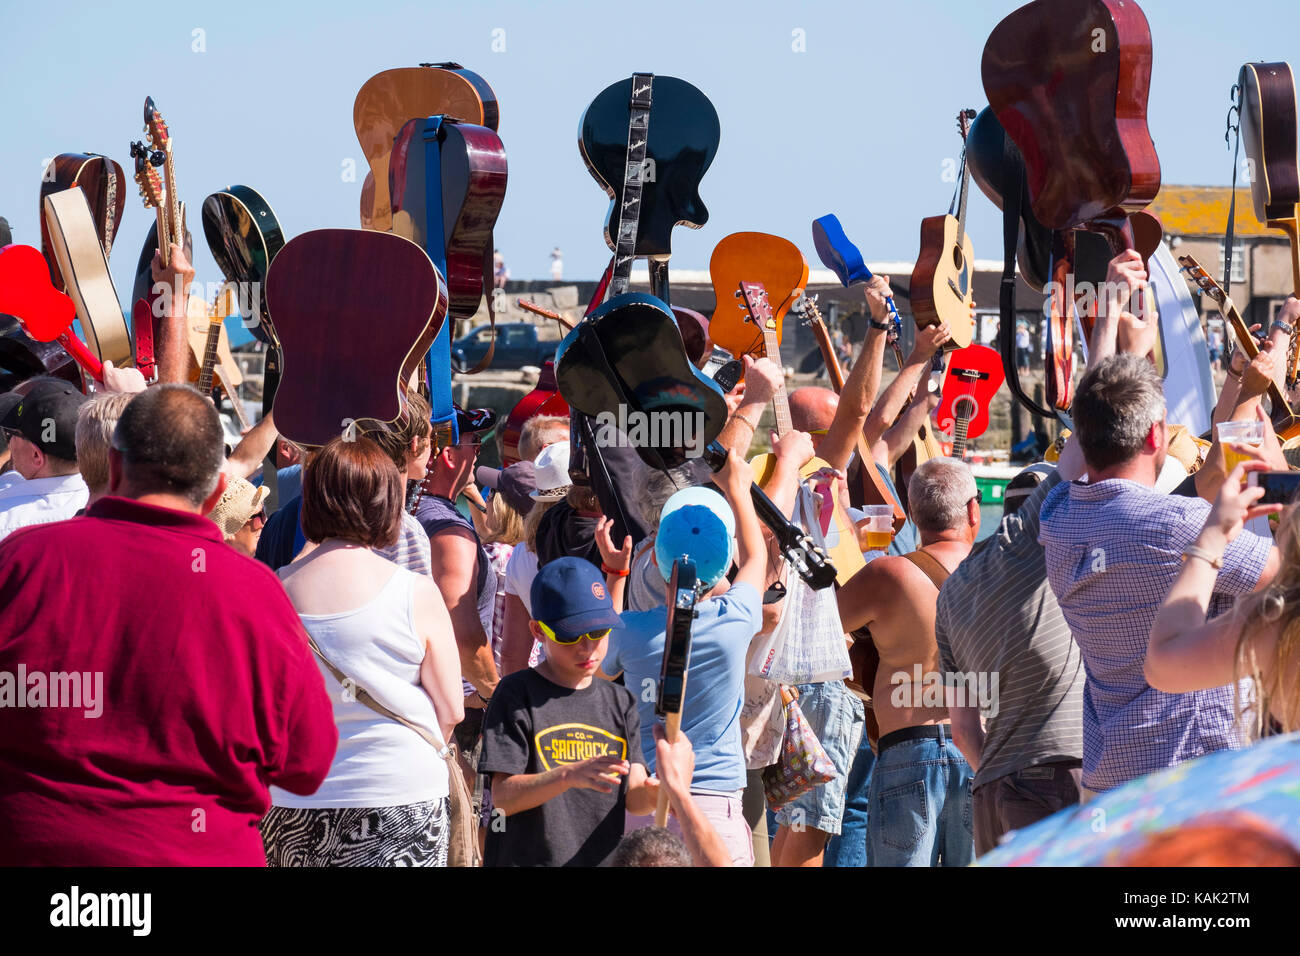 Guitarists hold their instruments aloft during the Guitars on the Beach event at Lyme Regis, Dorset, UK. Stock Photo